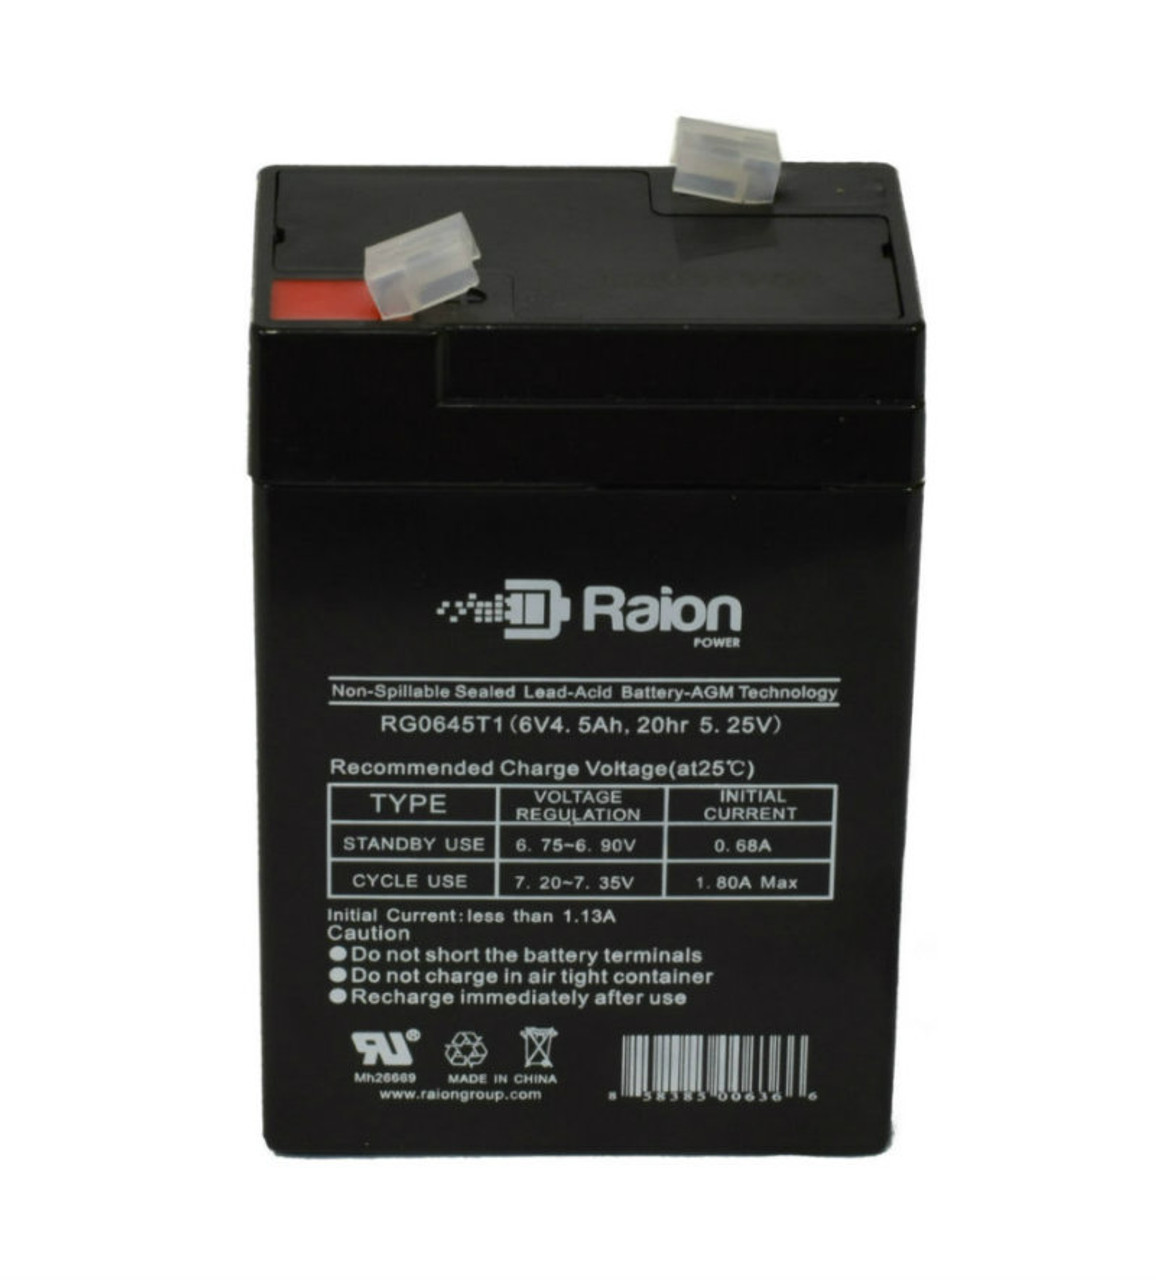 Raion Power RG0645T1 Replacement Battery Cartridge for Duramp NP4-6